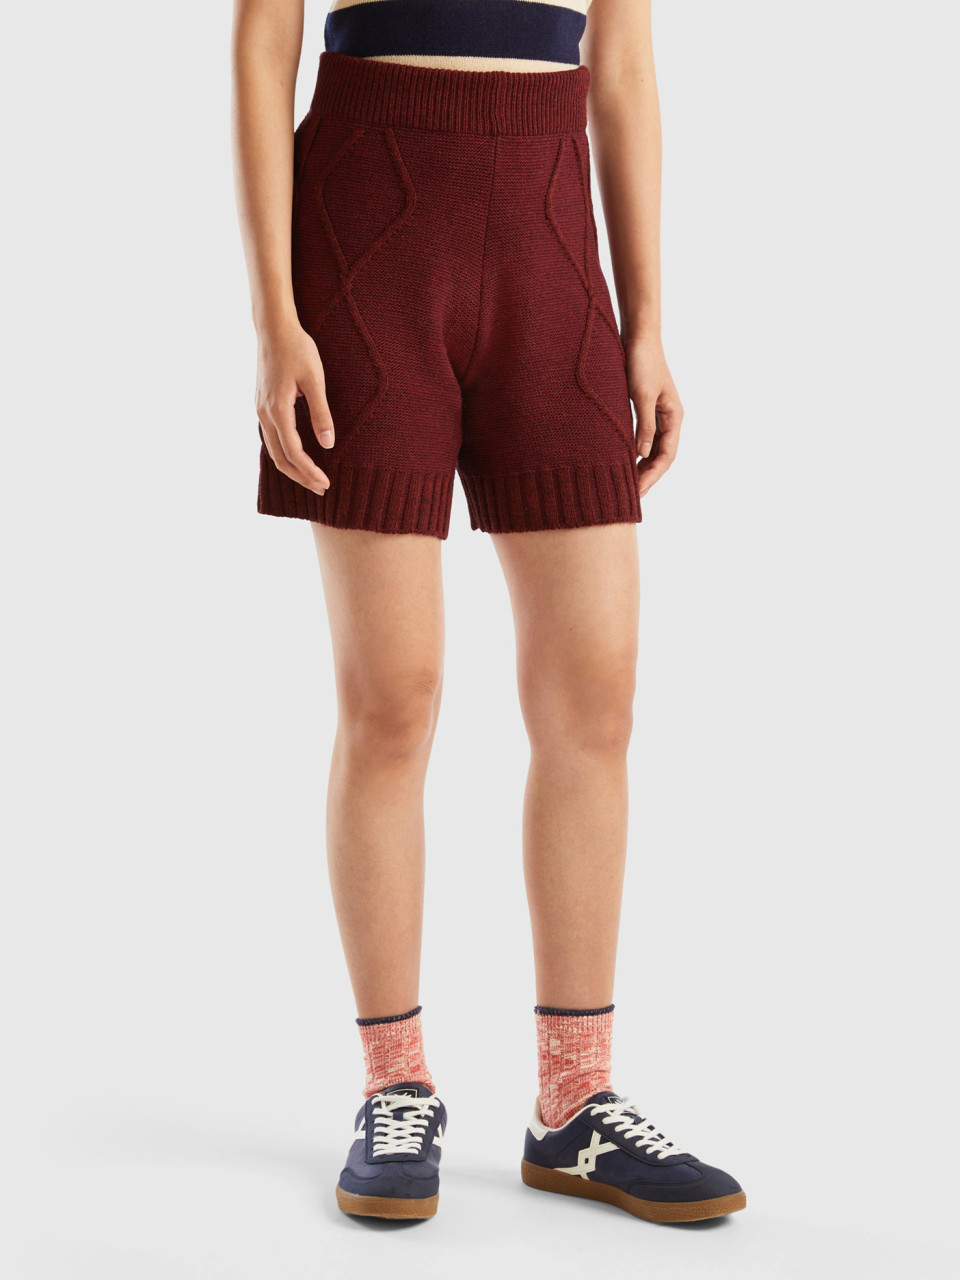 Benetton, Knit Bermudas With Cables And Diamond Pattern, Burgundy, Women